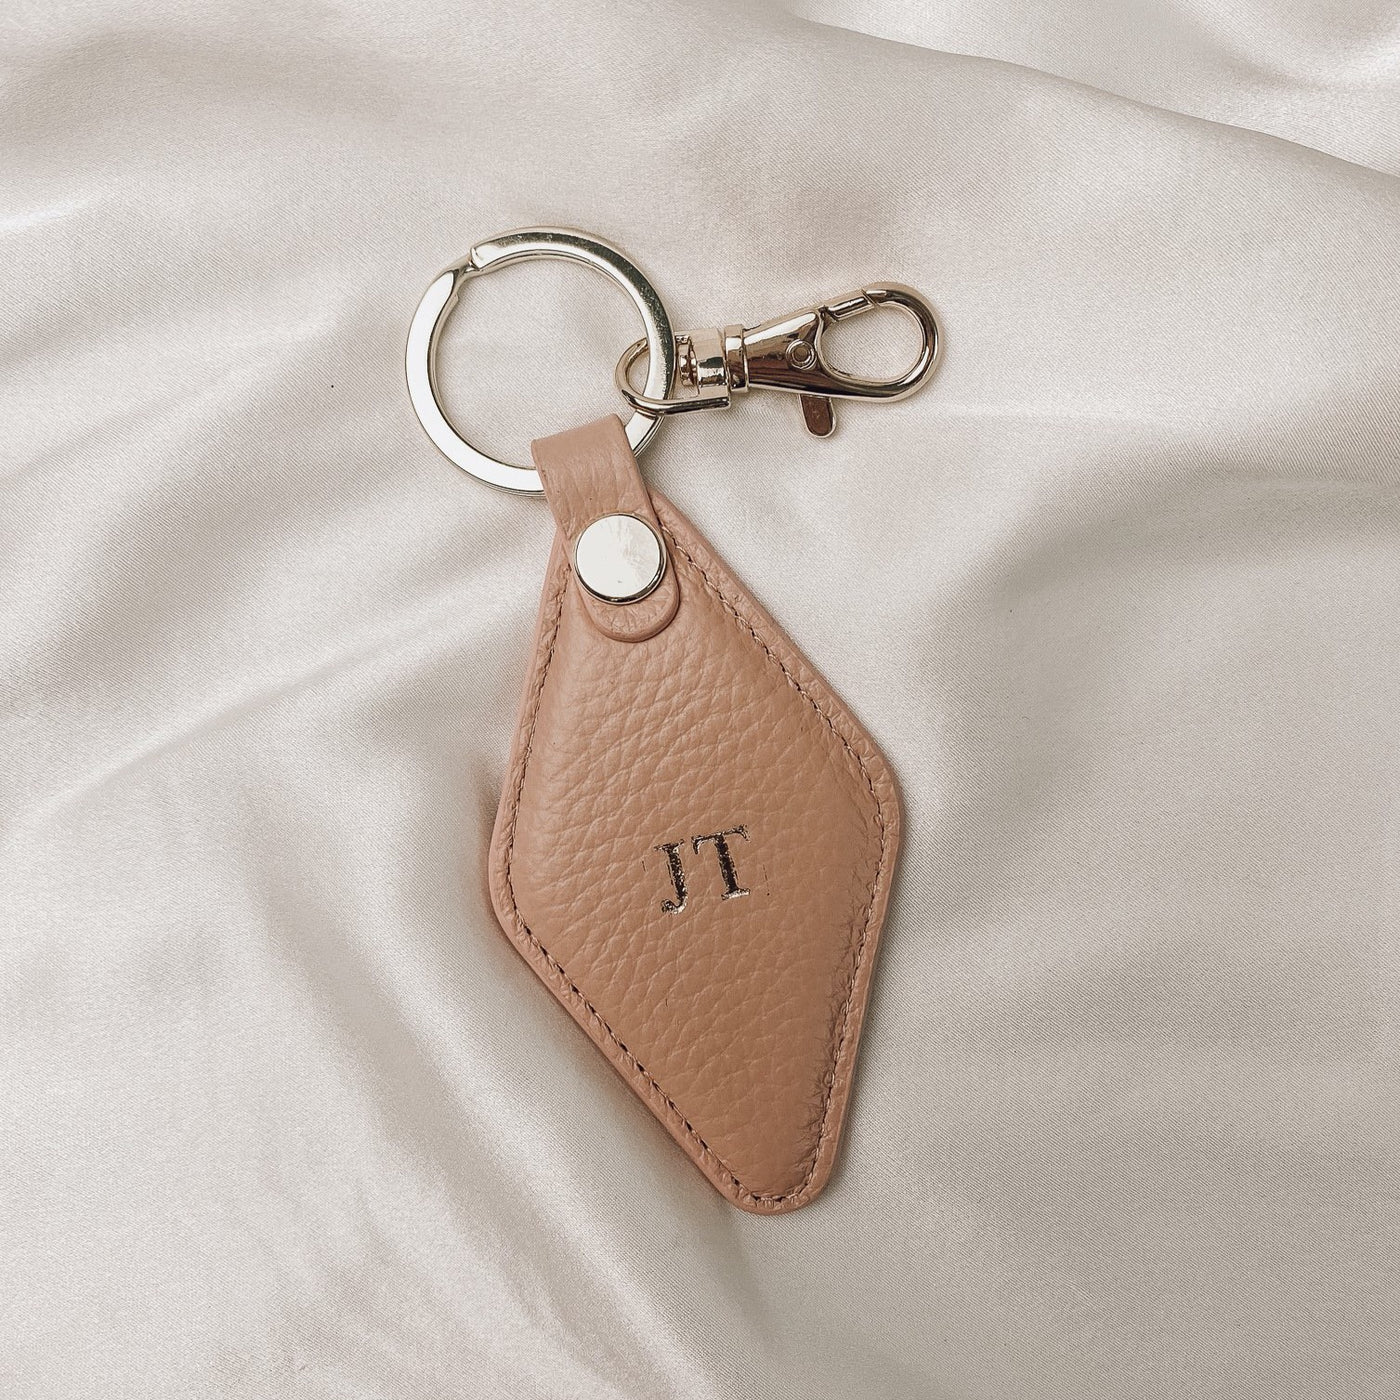 blush diamond keyring with gold hardware  on a silk backdrop. the keyring is embossed with the initials JT